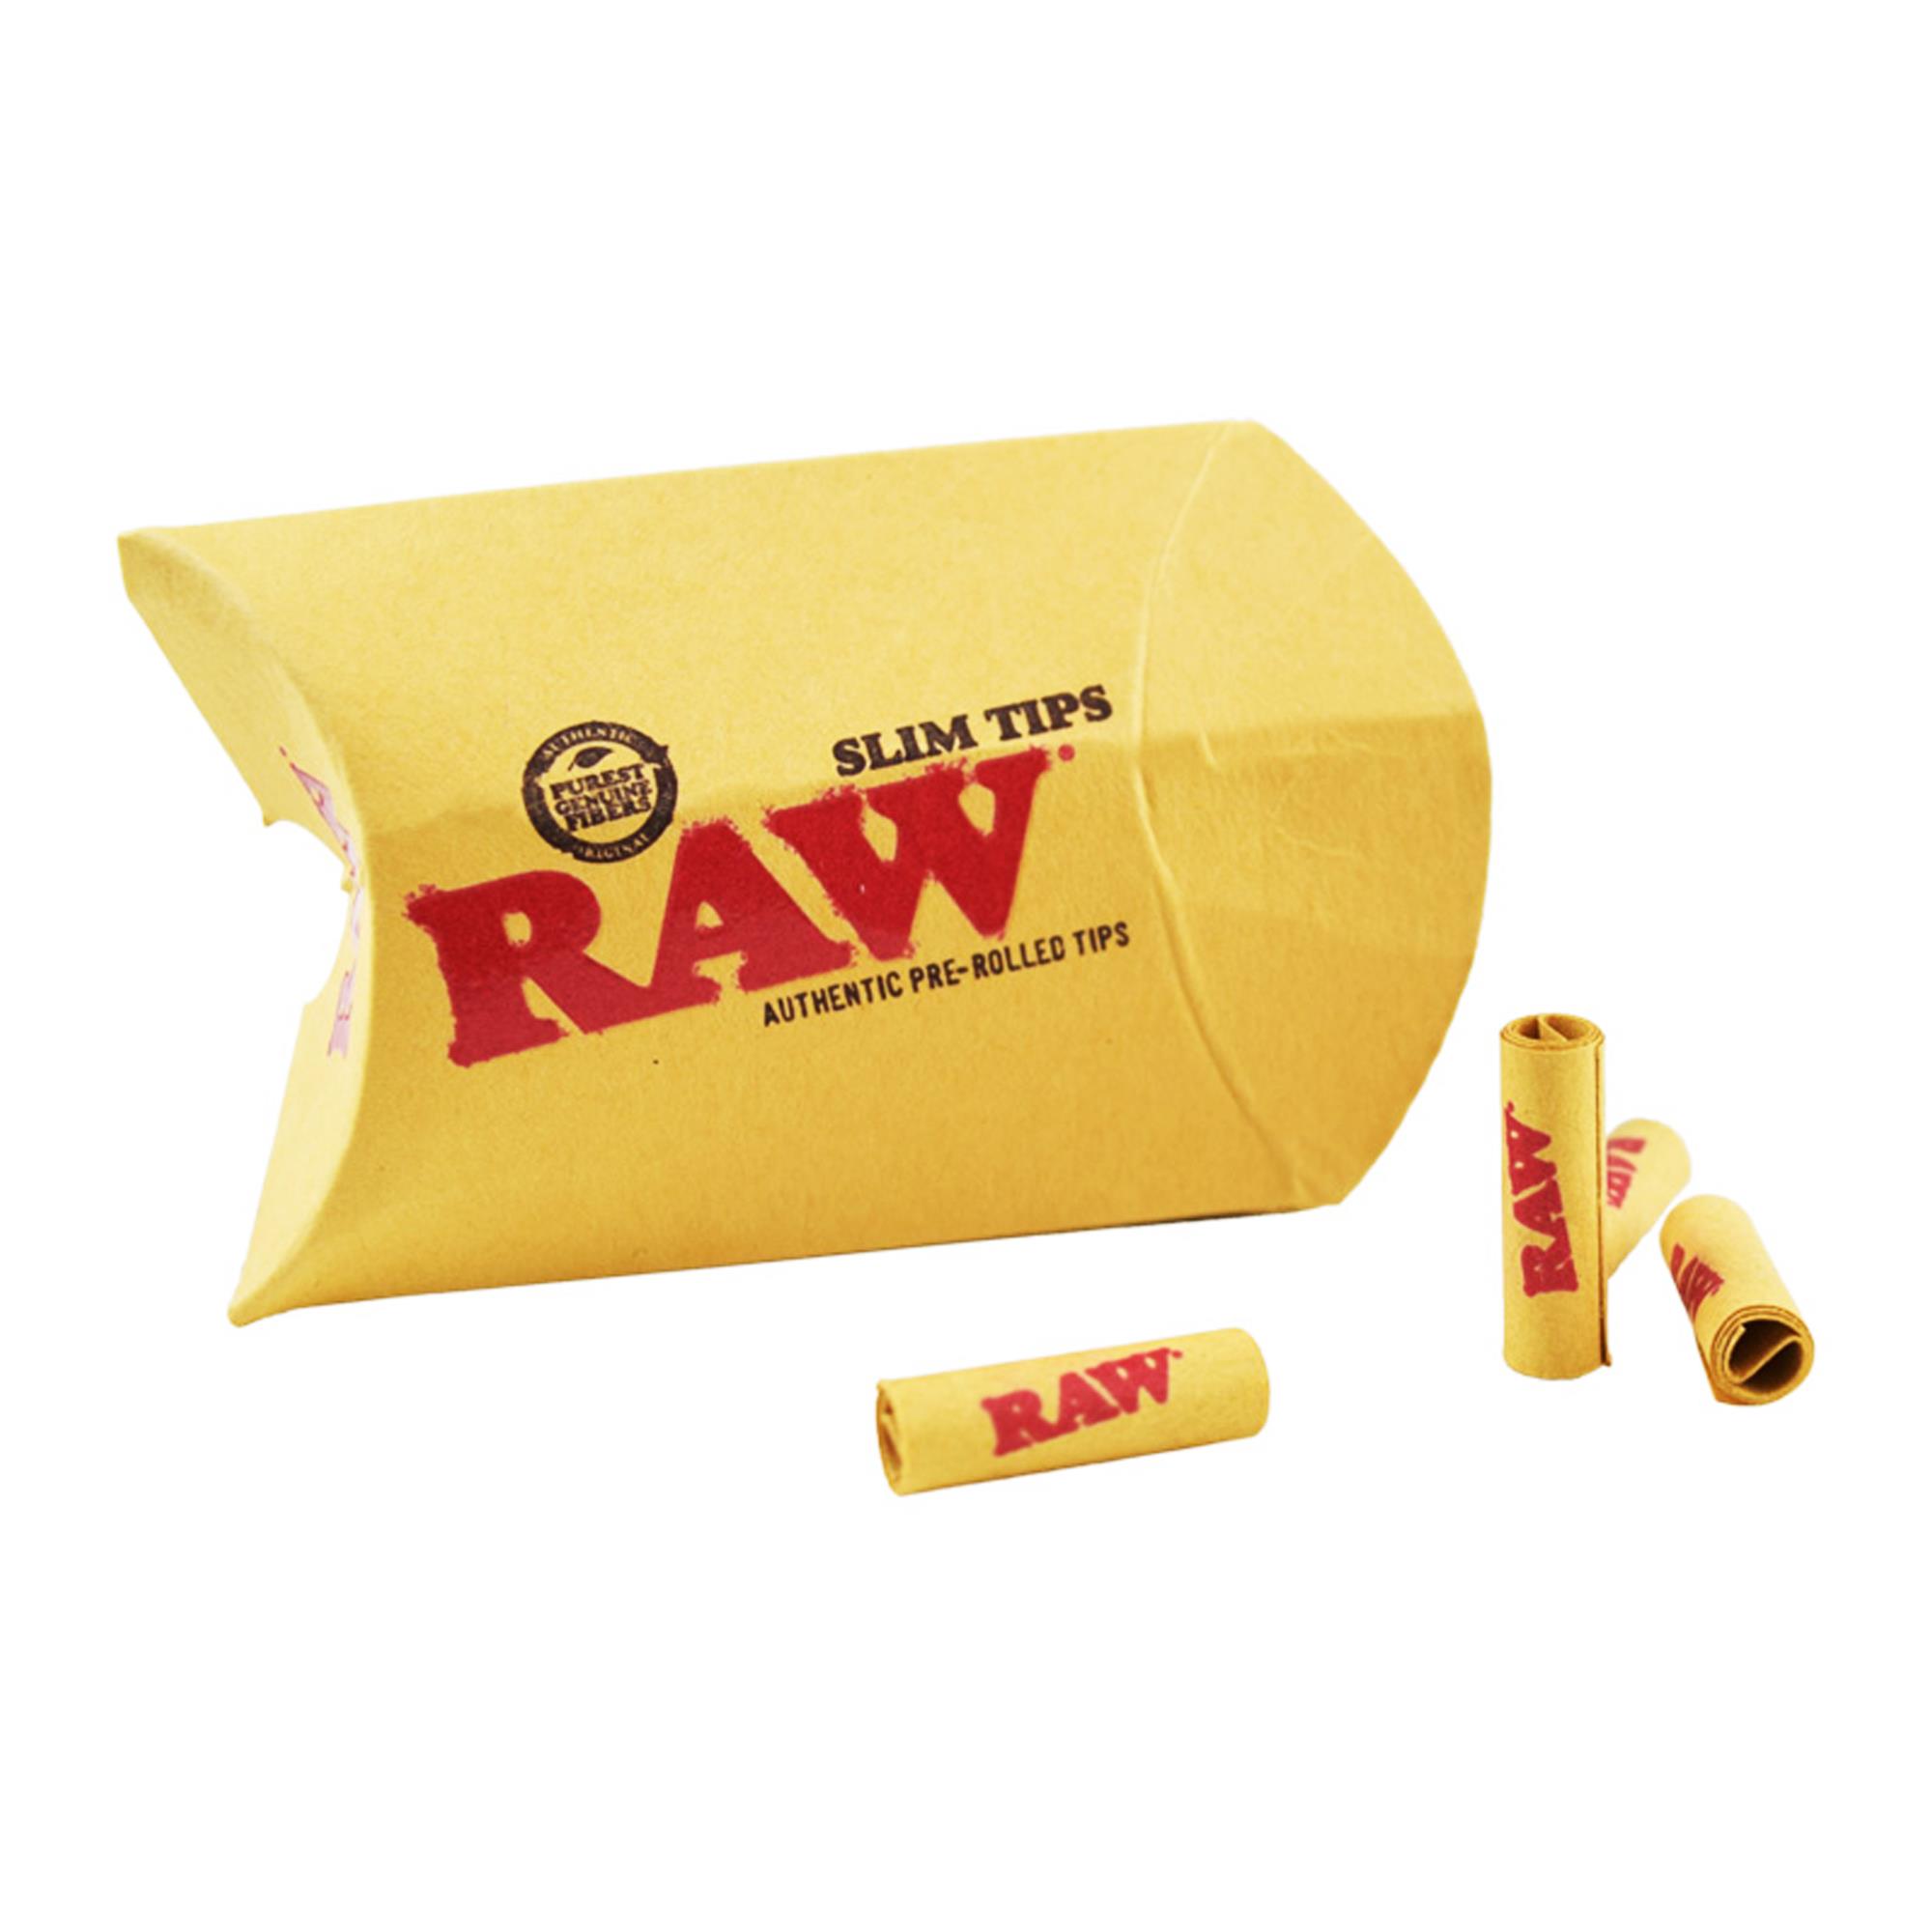 RAW PRE-ROLLED UNBLEACHED SLIM TIPS